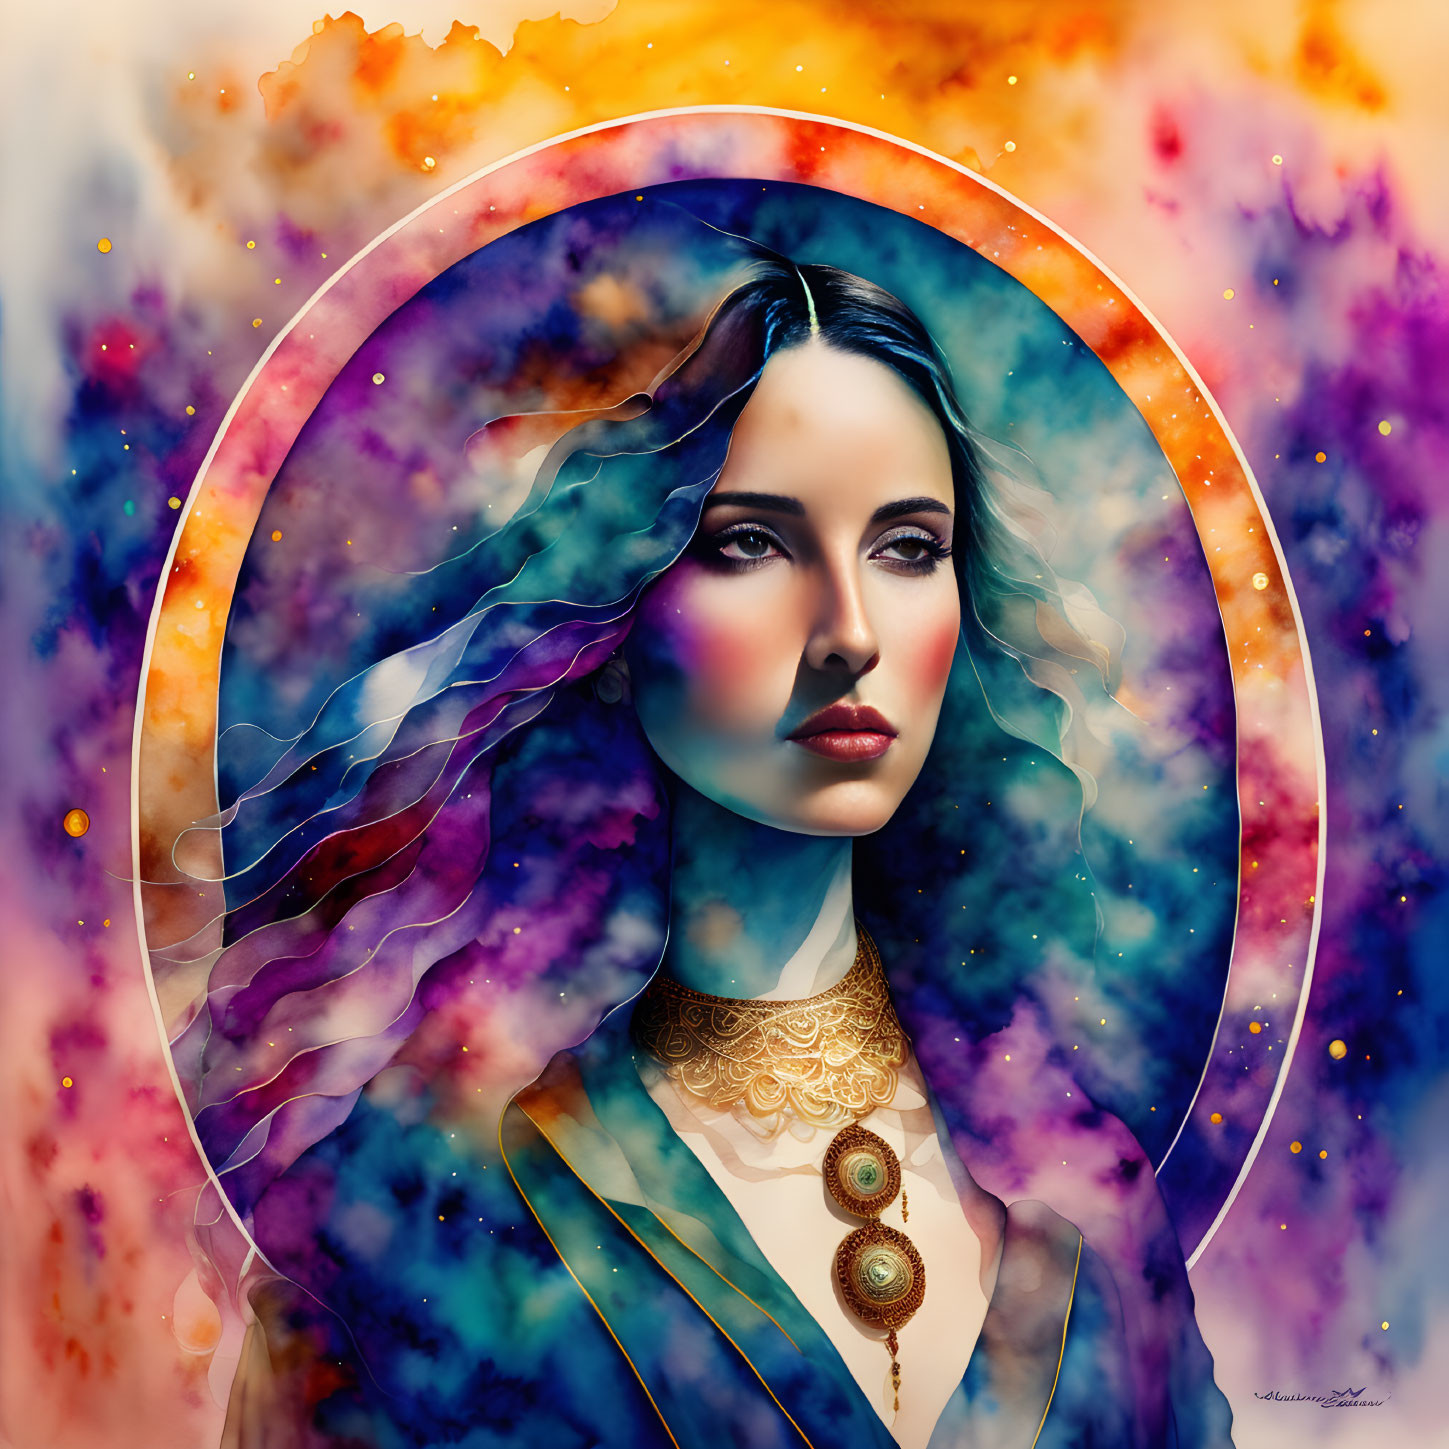 Colorful cosmic-themed digital painting of a woman with glowing, nebula-like clouds